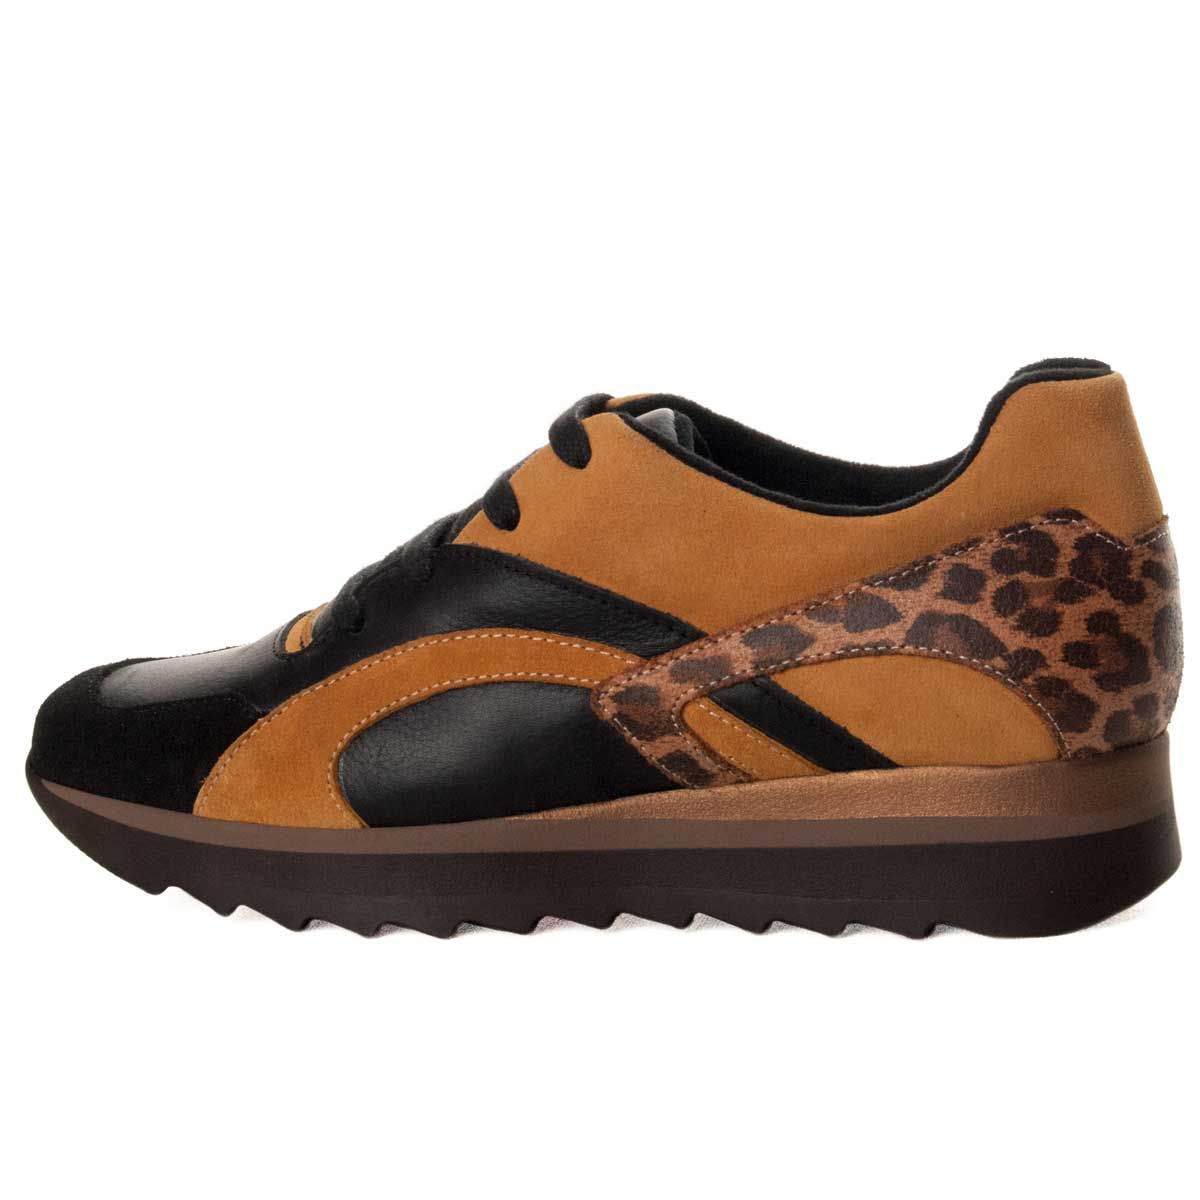 Skener with fine-haired lined interior, and non-slip sole. Skener very comfortable, and very current for its finishes and leopard material, ideal for an urban daily style. Manufactured by hand, high quality, with wedge sole and laces. Built with a very durable rubber sole. Made in Spain.